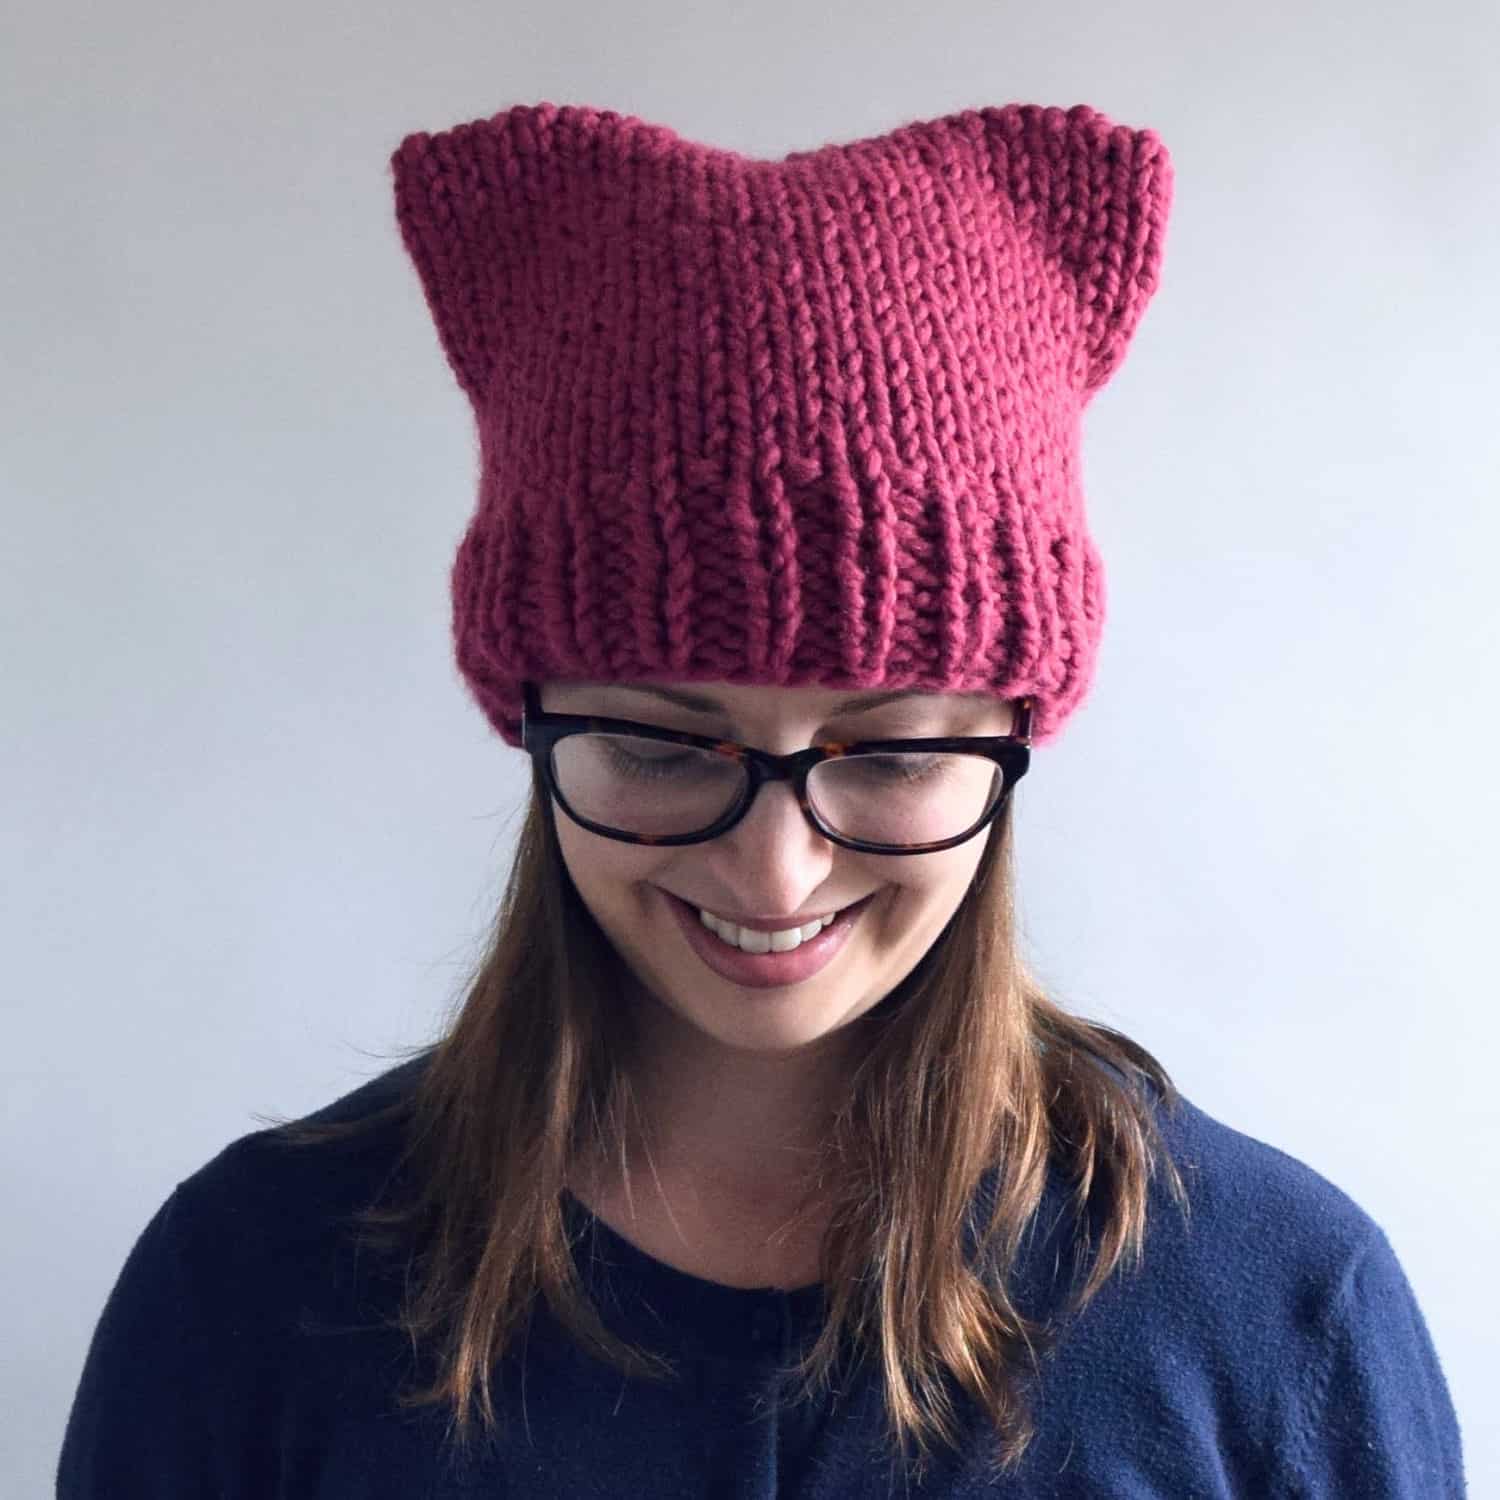 Free knitting pattern: Simple Beanie – Knit-a-square